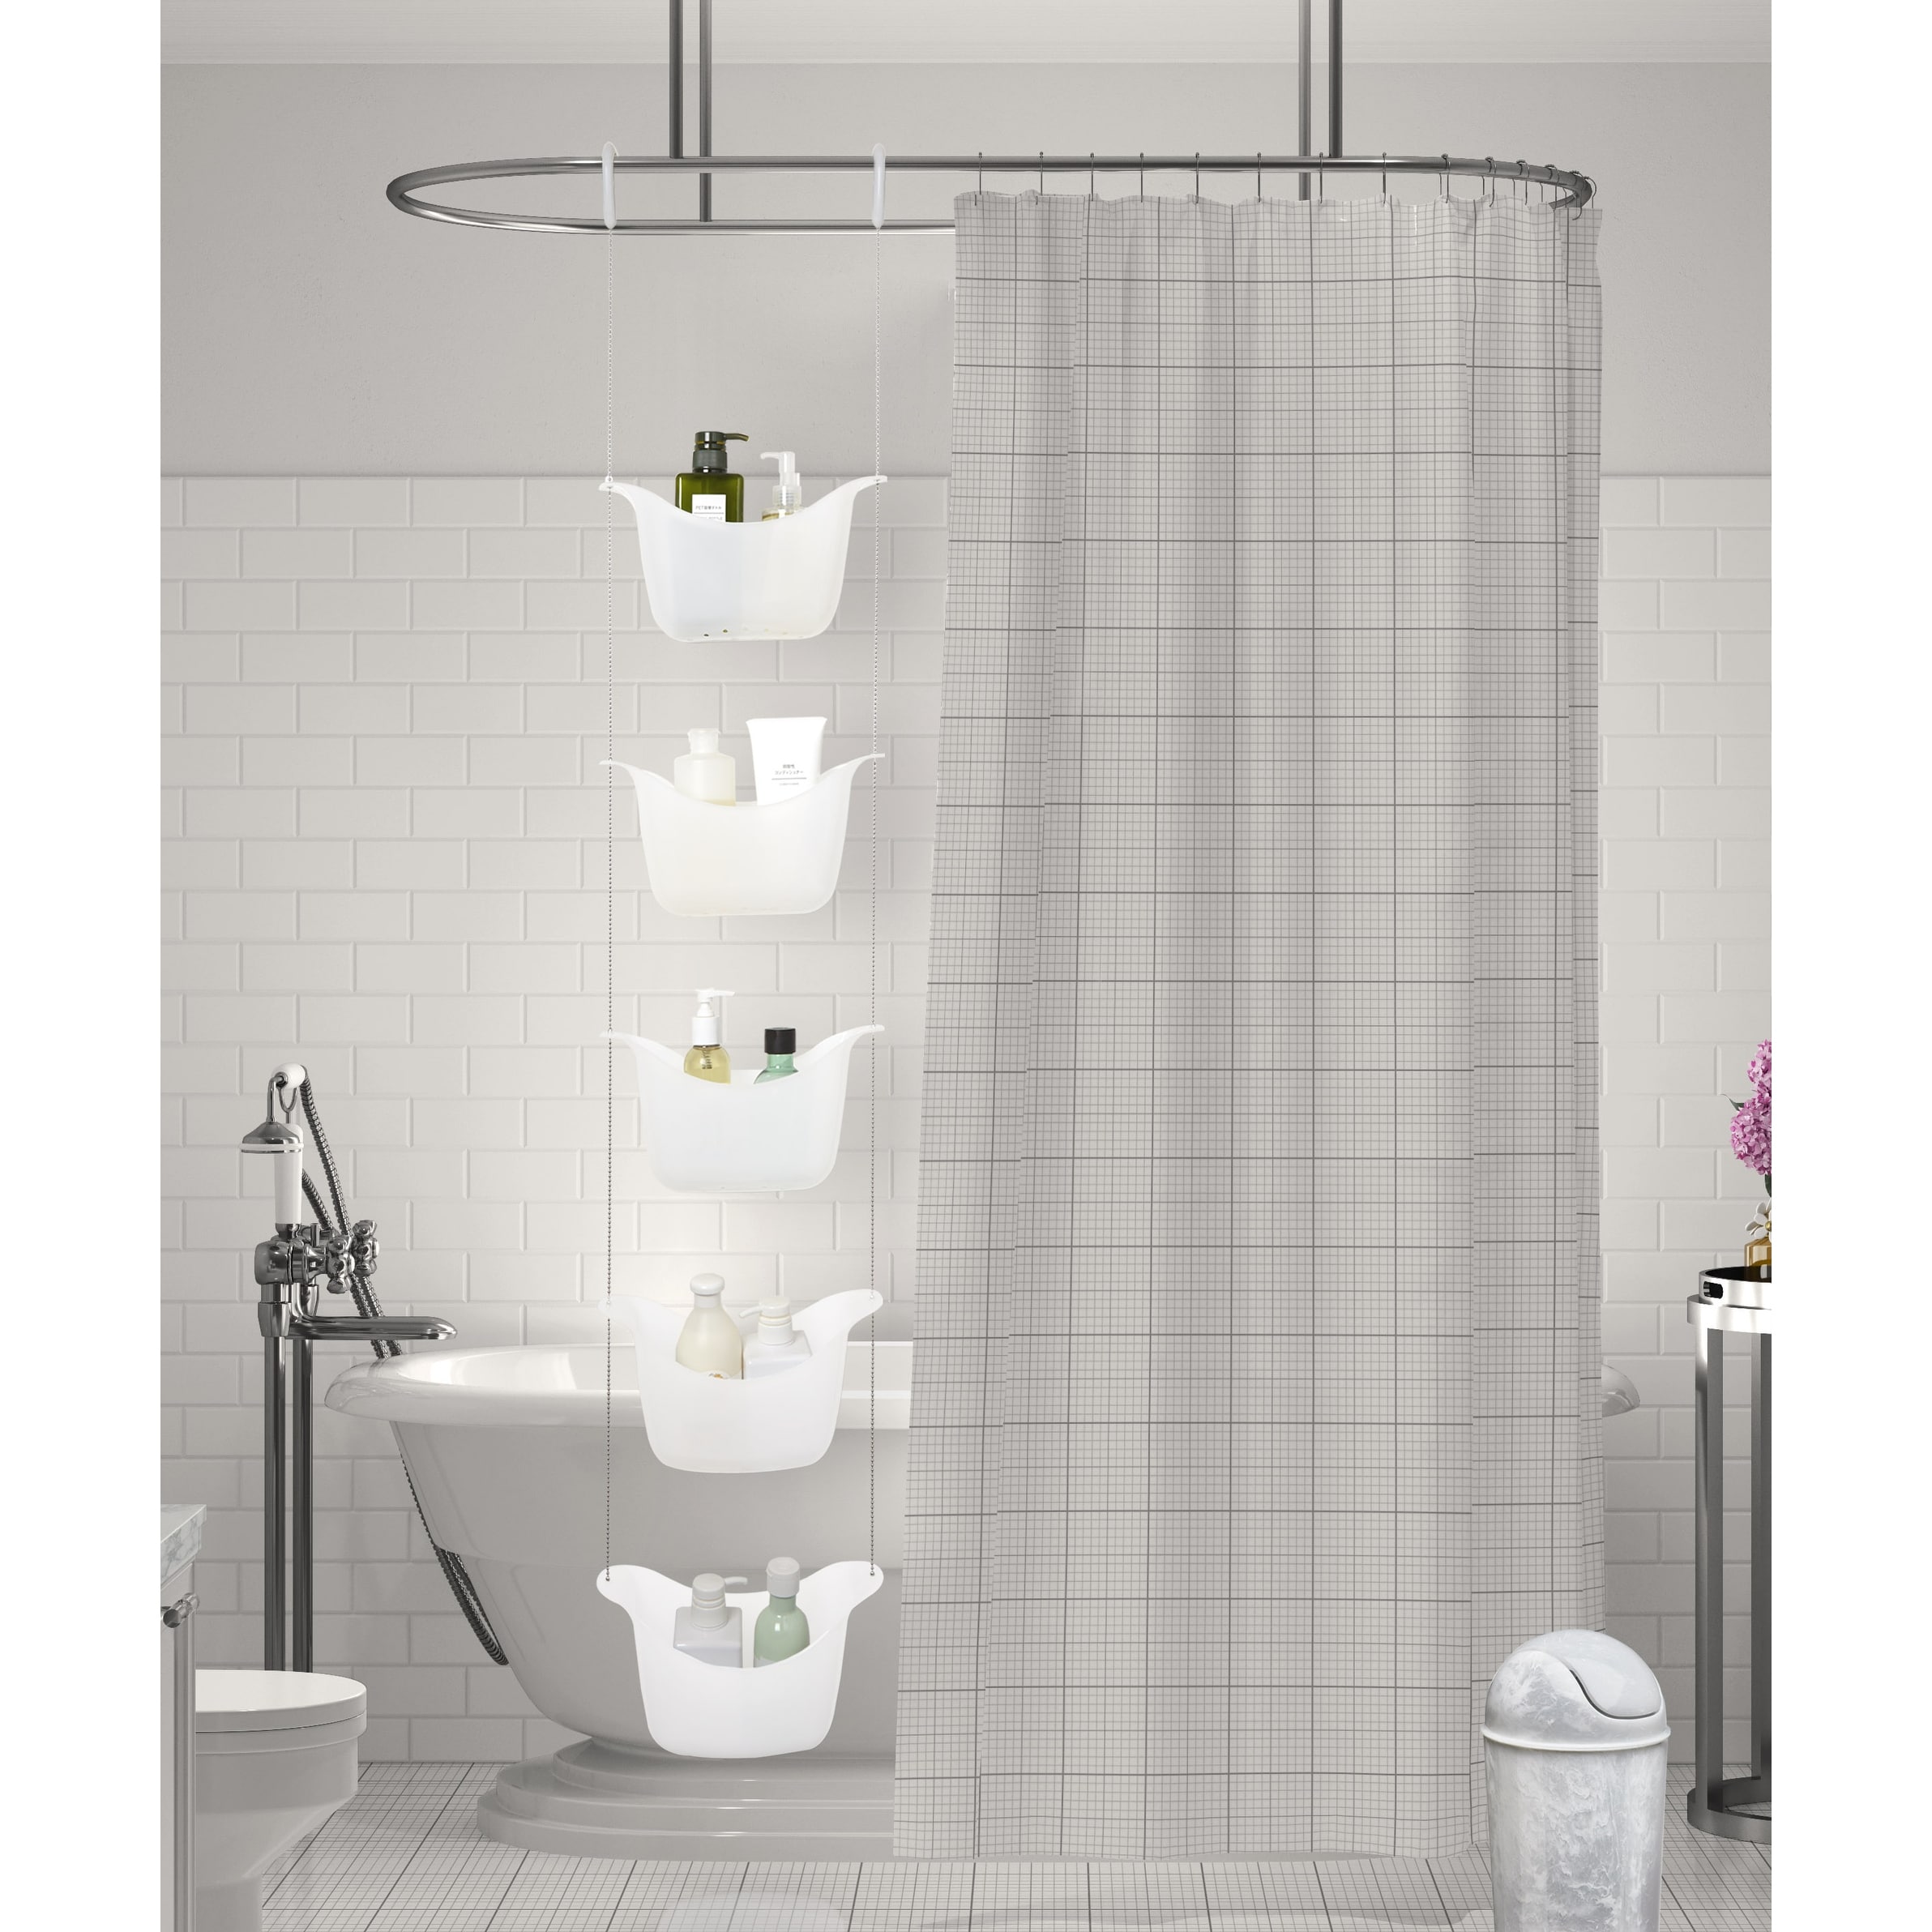 https://ak1.ostkcdn.com/images/products/is/images/direct/d7222886861f46246129d65c4d2a3caef2472e20/Umbra-BASK-Shower-Caddy.jpg